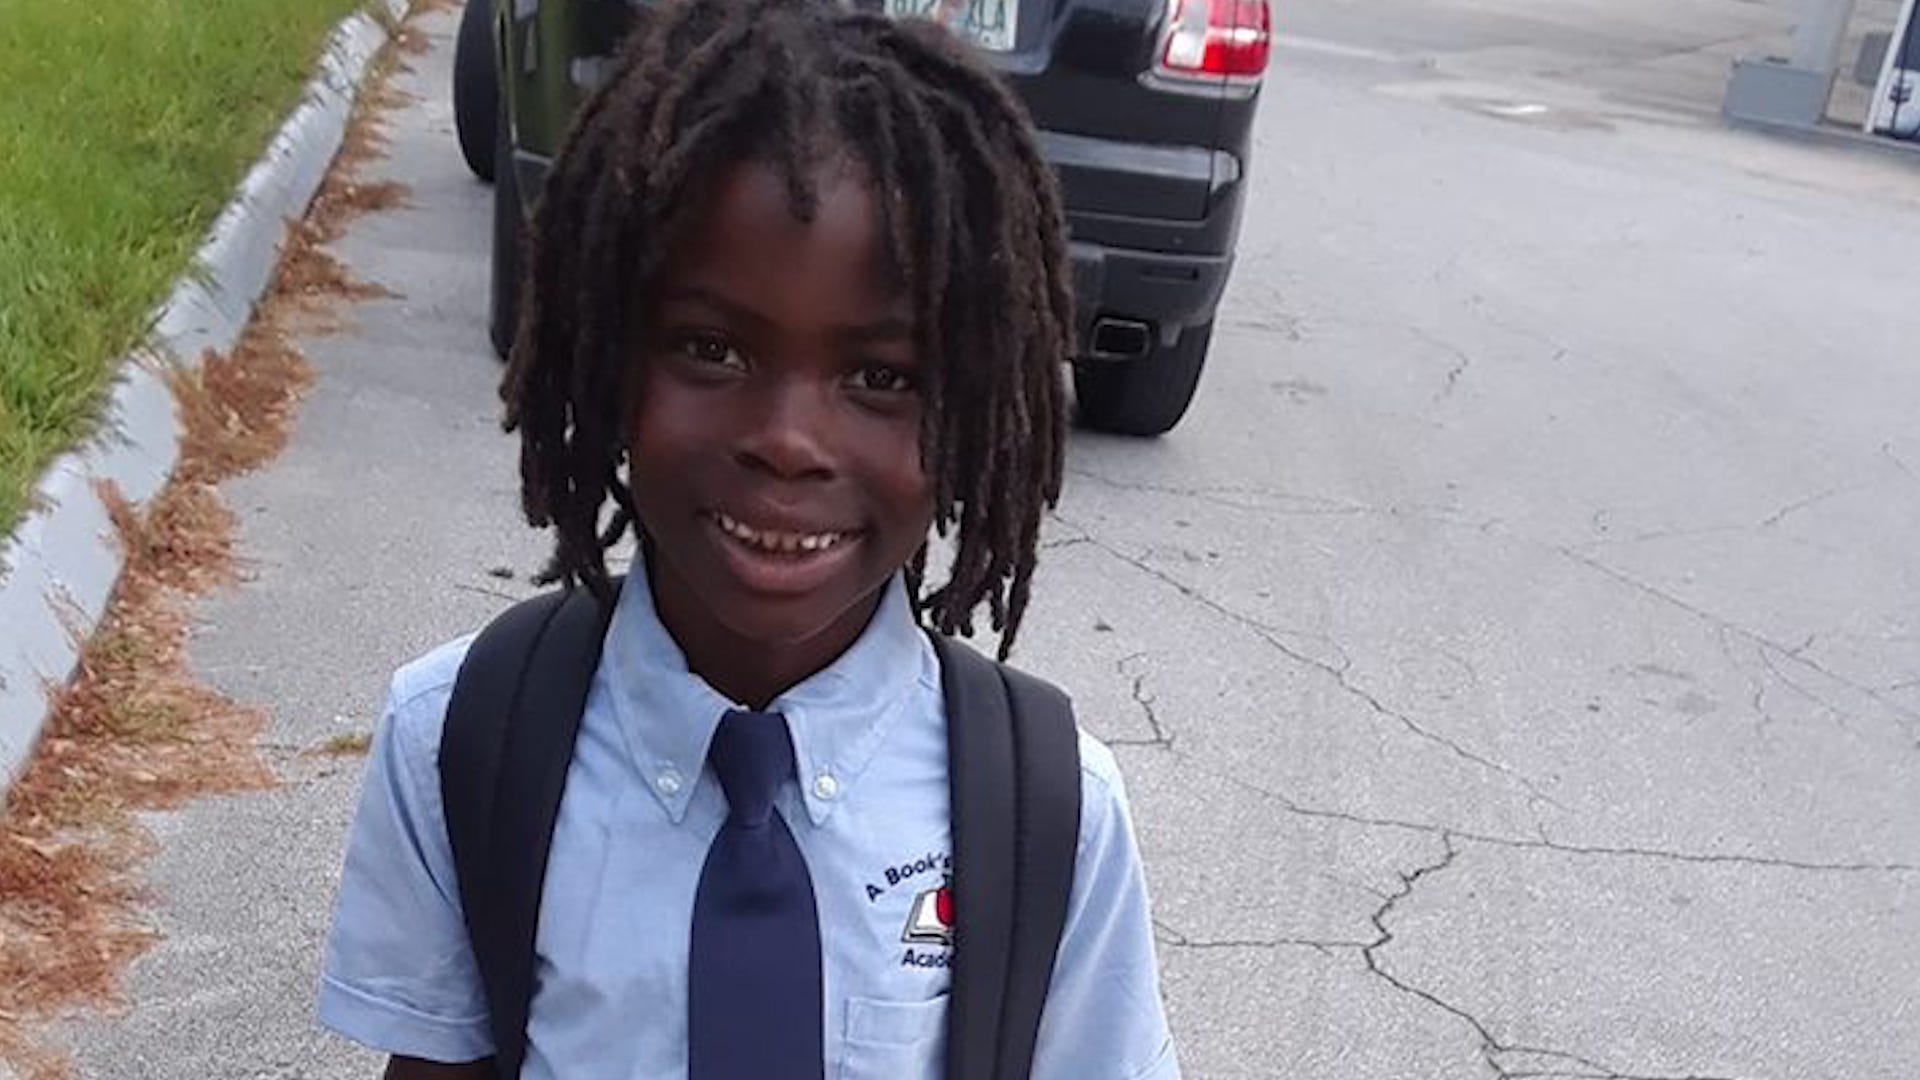 6 Year Old Boy With Locs Turned Away By School